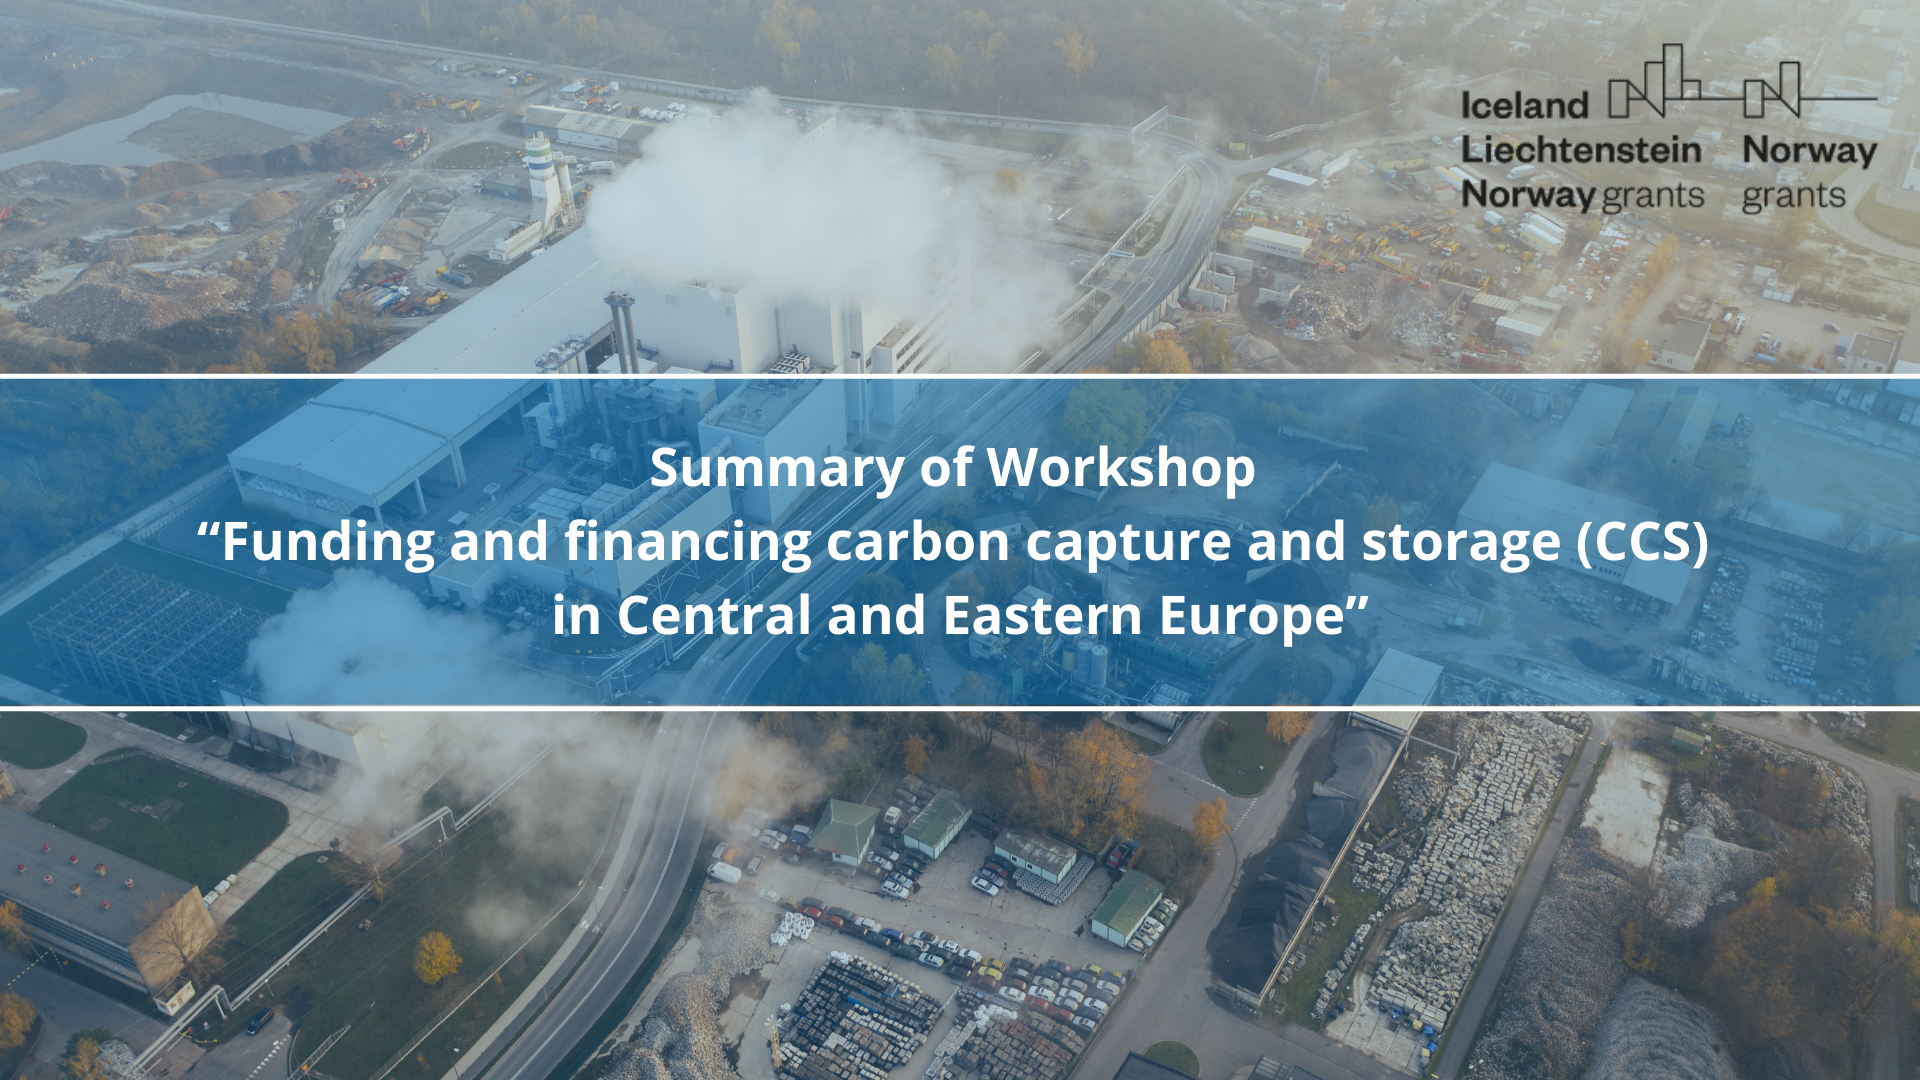 Summary of Workshop “Funding and financing carbon capture and storage (CCS) in Central and Eastern Europe”